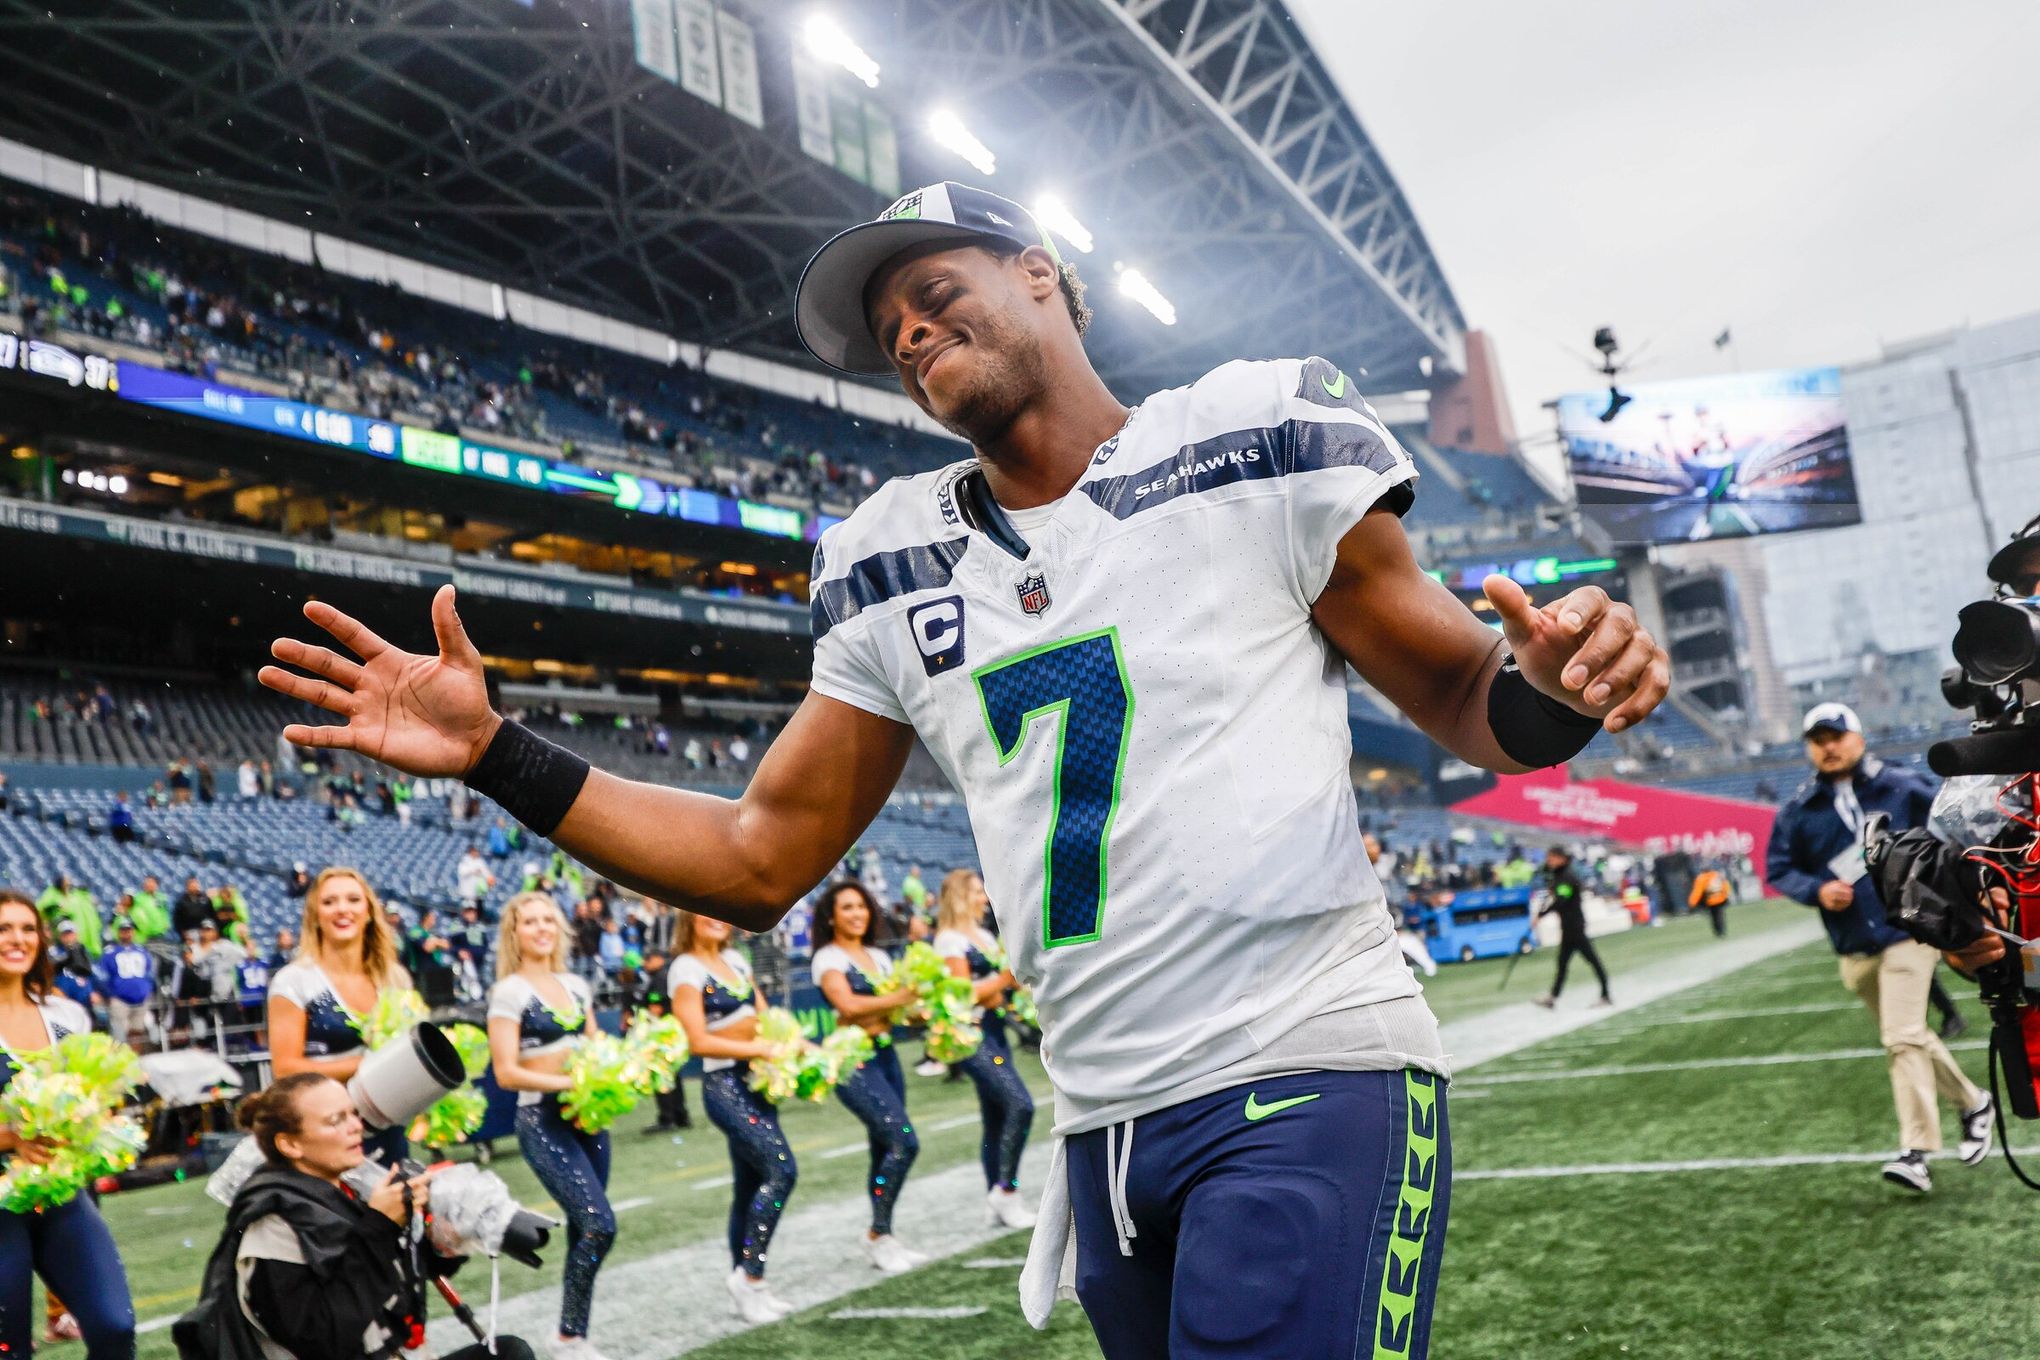 Seattle blows out Denver for first Super Bowl win - West Central Tribune